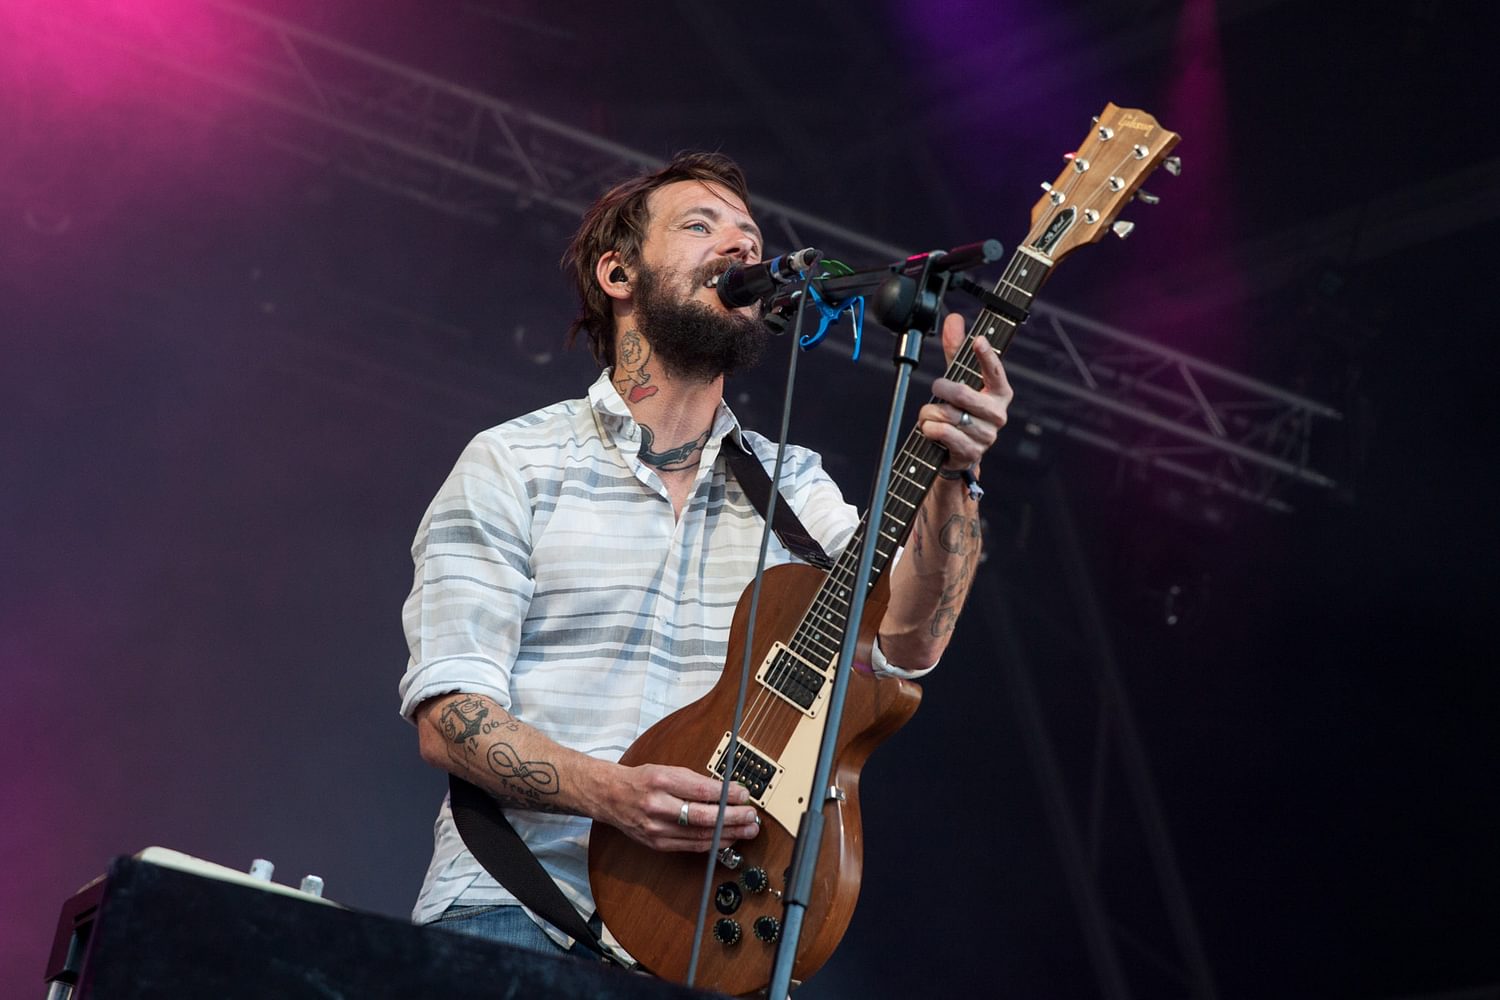 Band of Horses say new album is set for Spring 2016